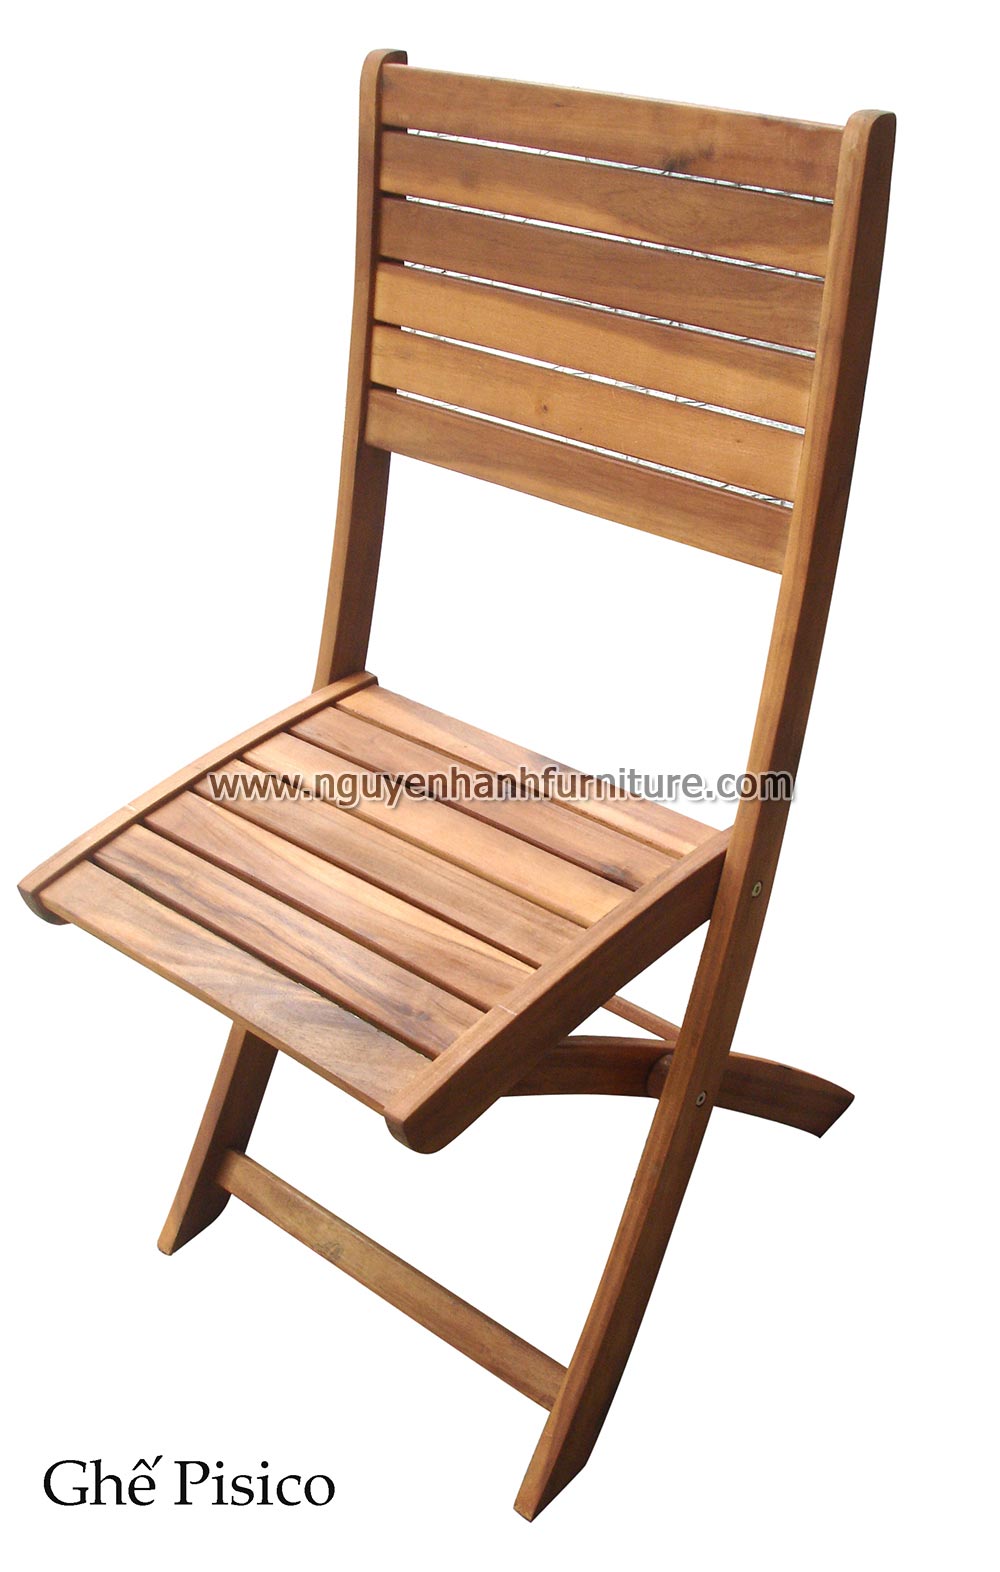 Name product: Pisico chair - Dimensions:  - Description: Red oil wood